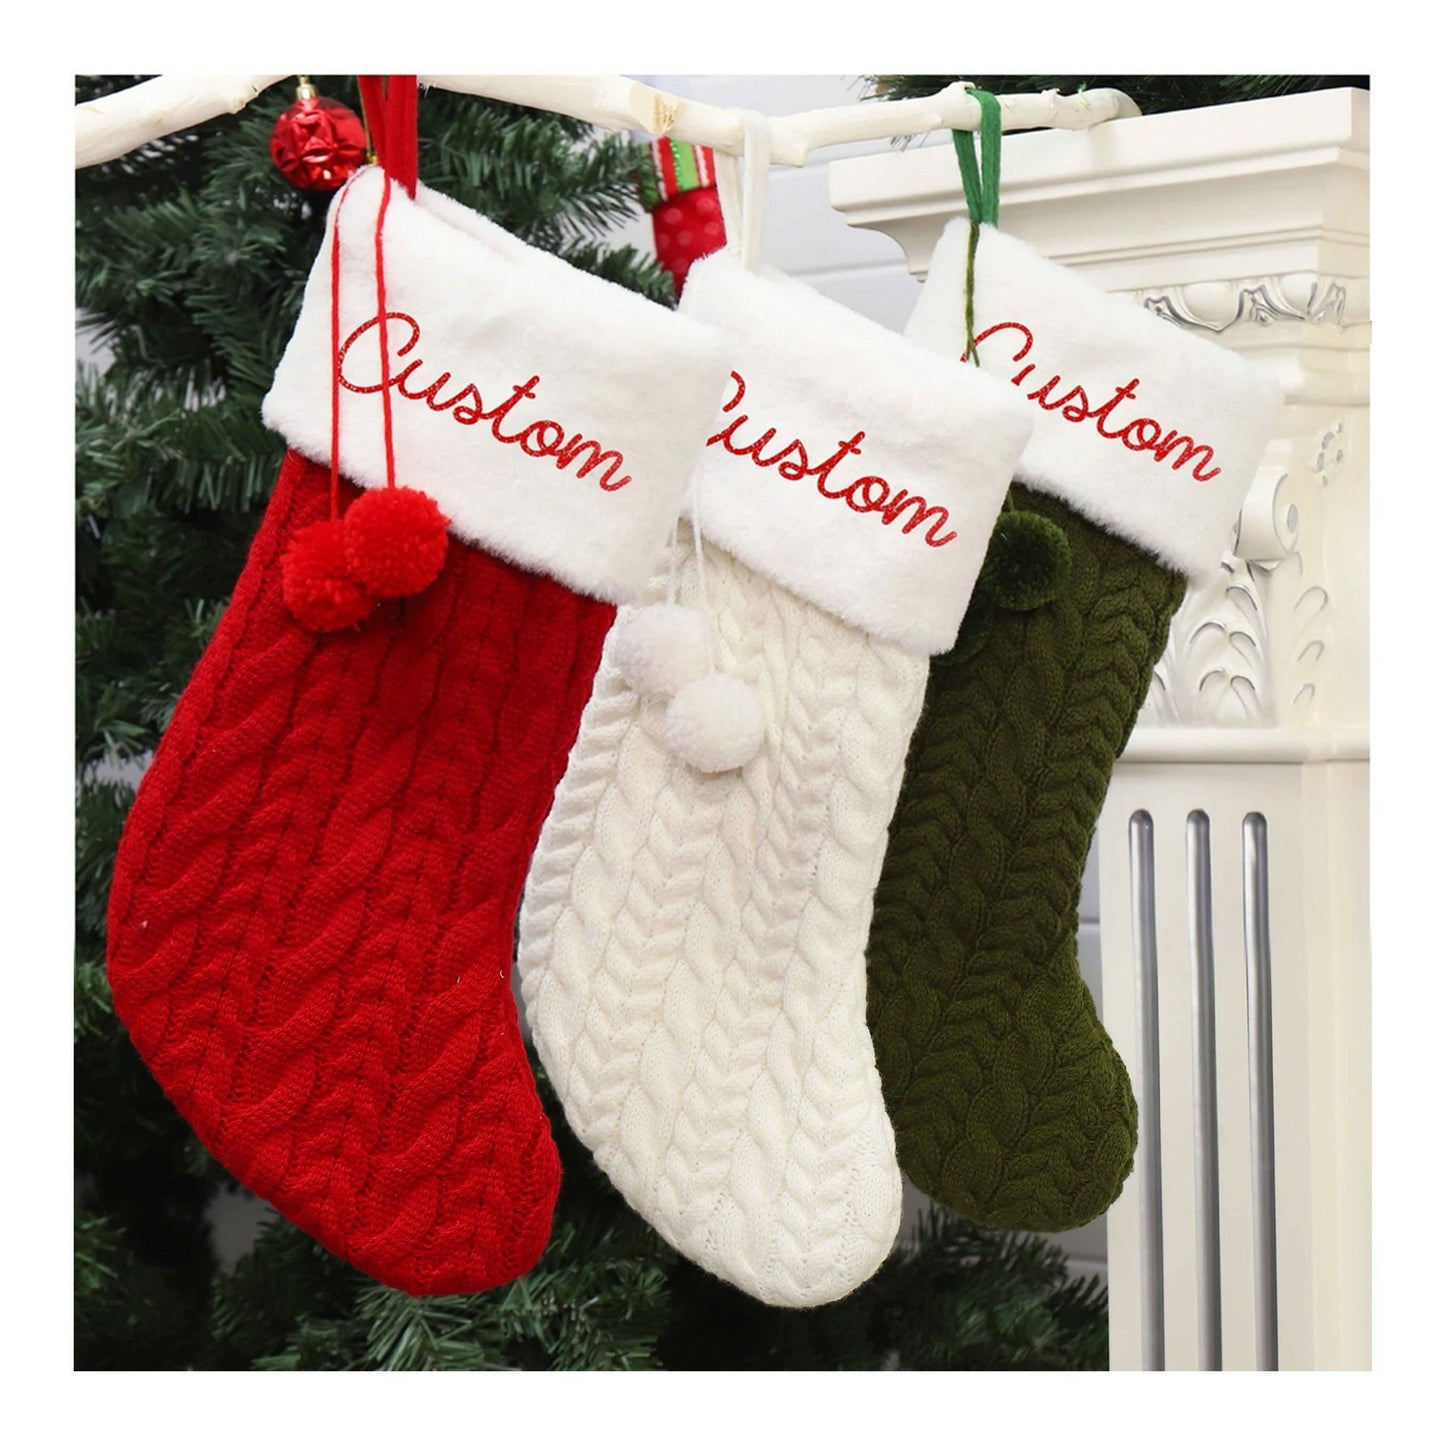 Custom Christmas Stockings, AFTER CHRISTMAS SALE Custom Knitted Christmas Stocking, Personalized Stockings, Christmas Gifts, Christmas